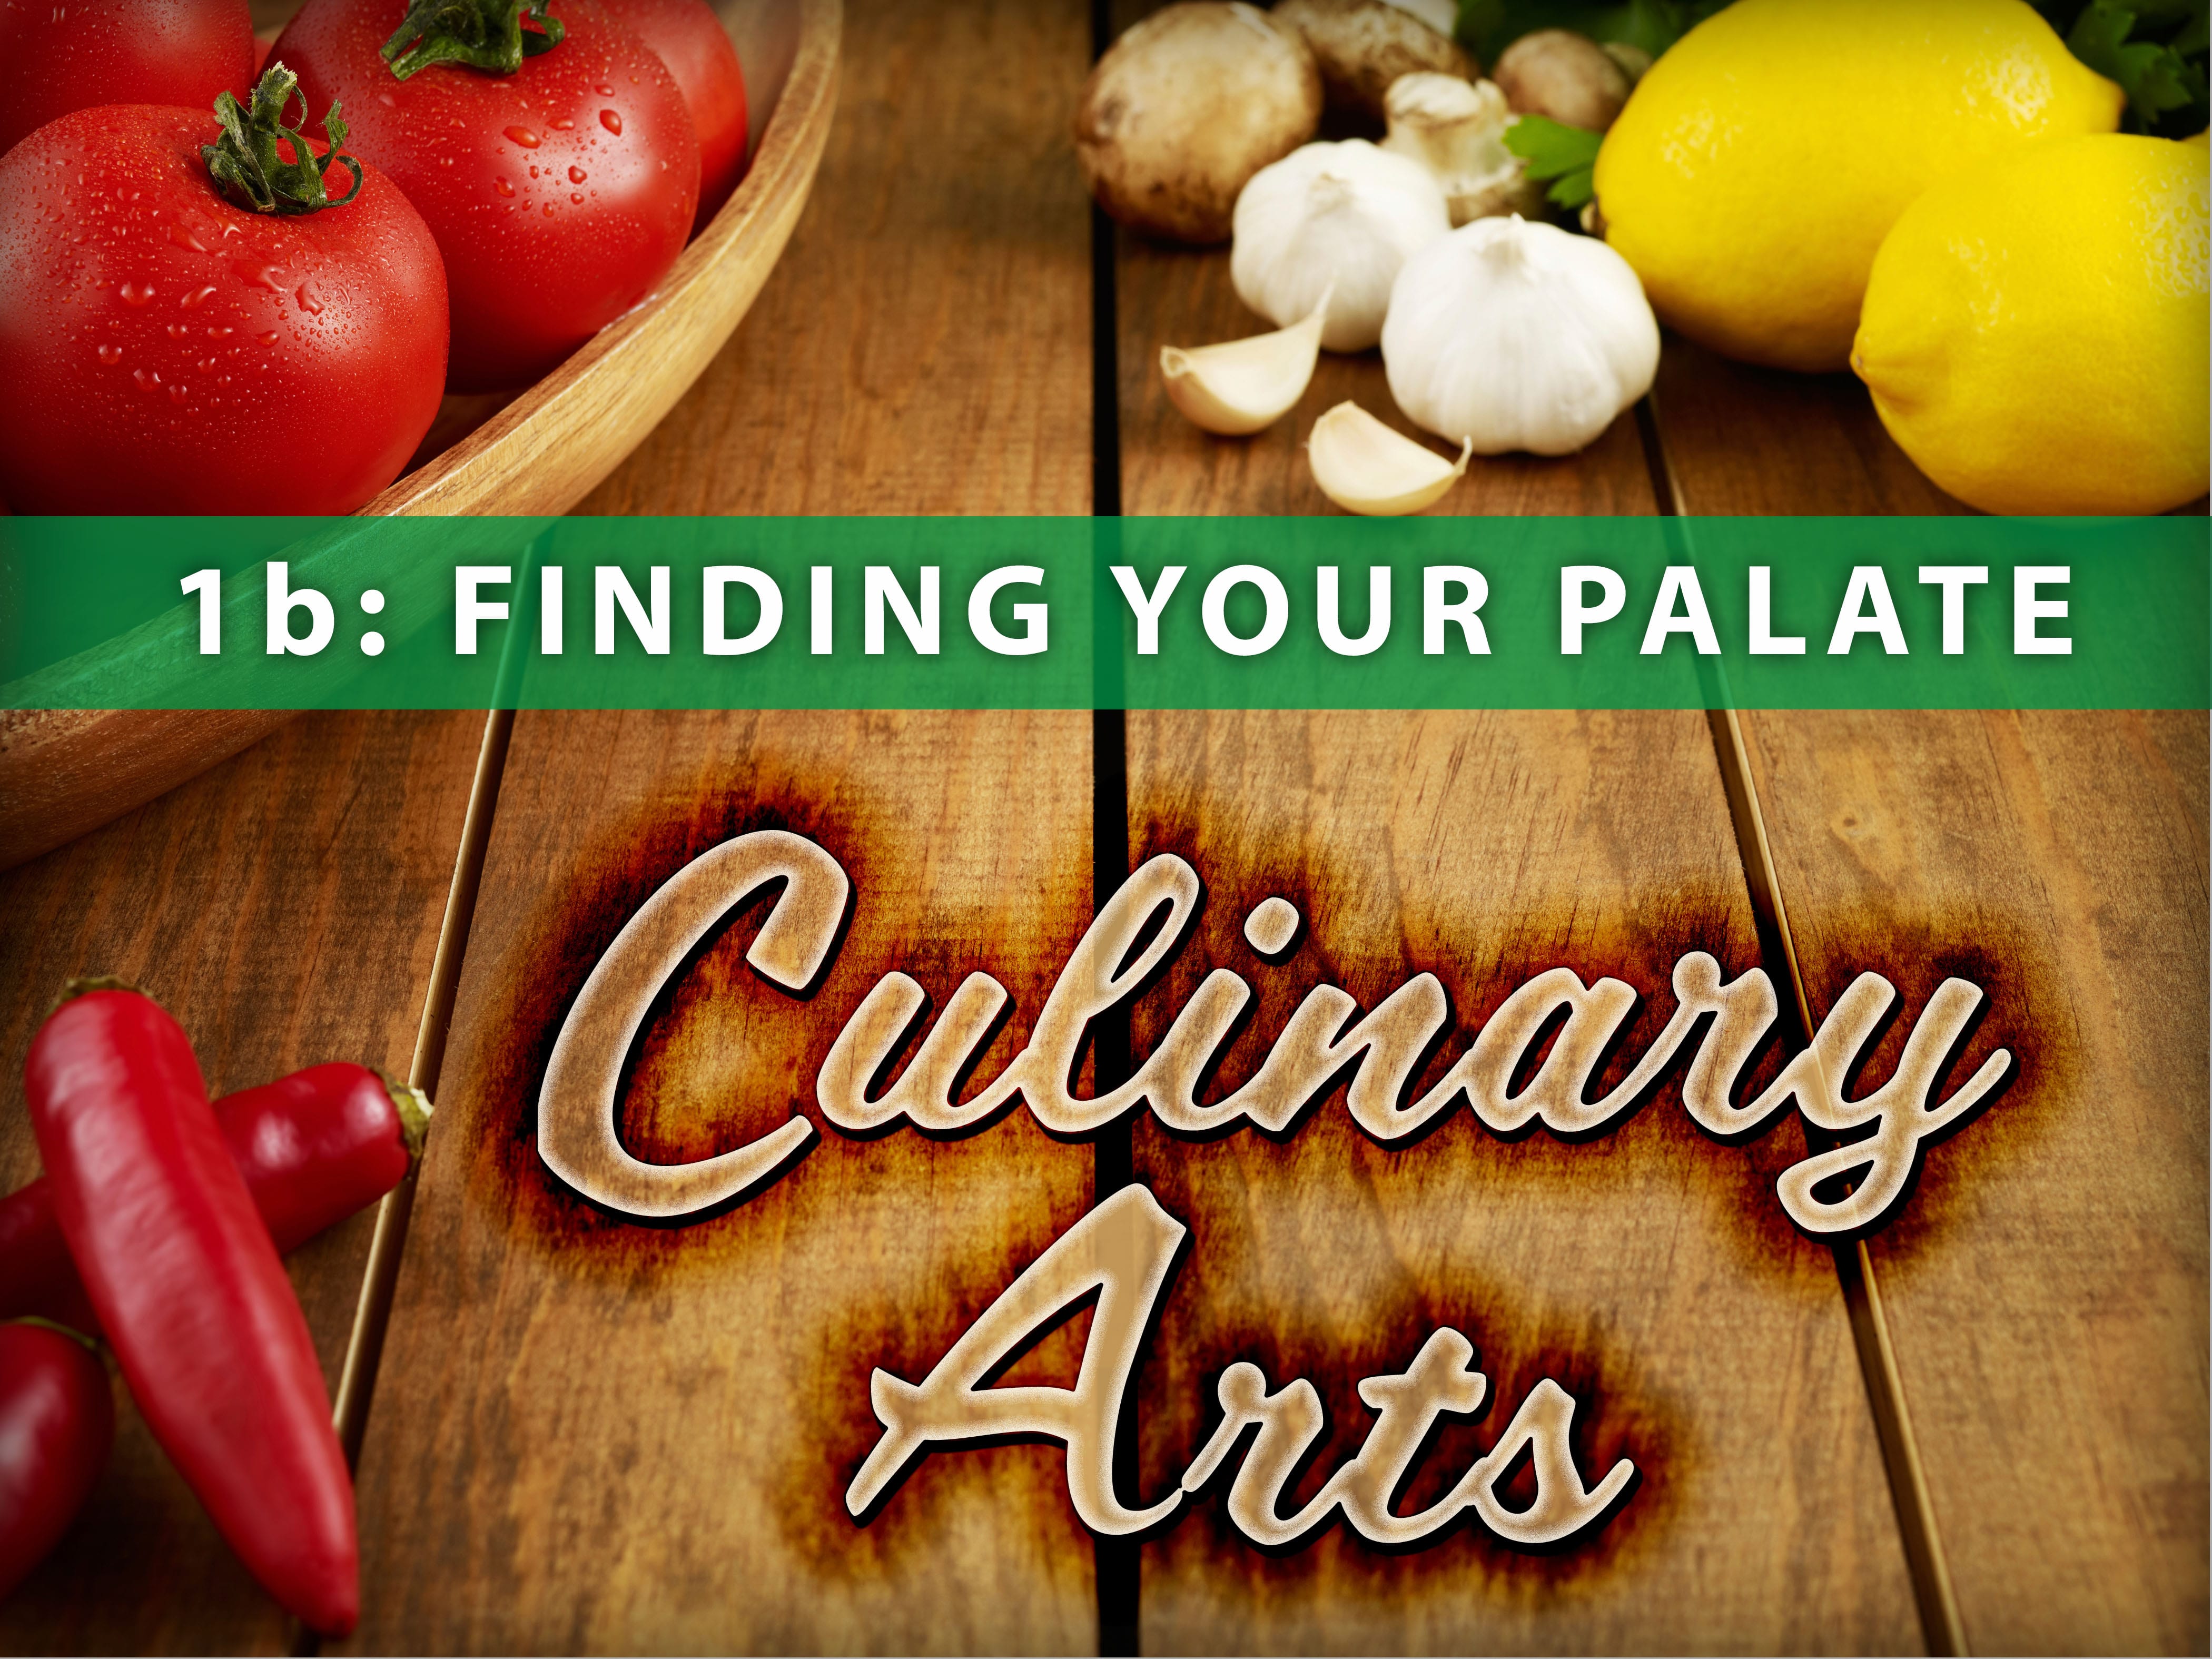 eDL CTE course: Culinary Arts 1b: Finding Your Palate